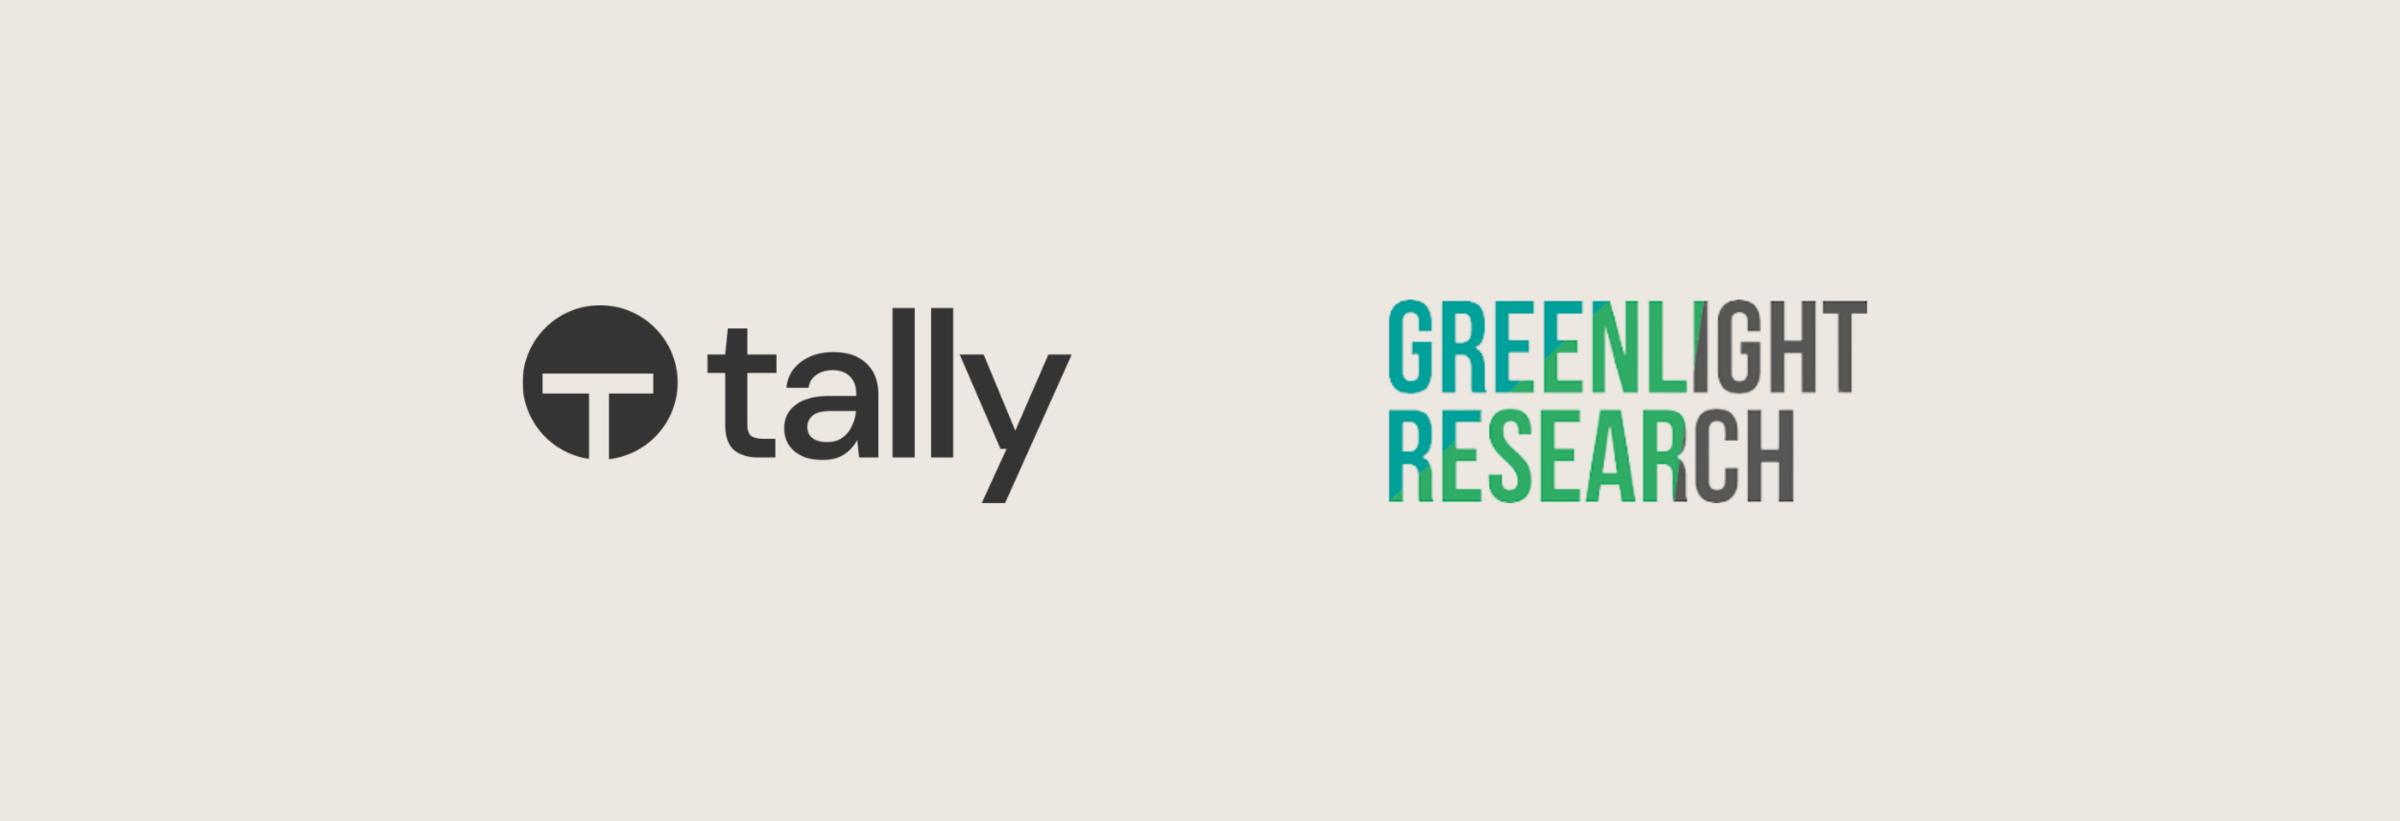 Tally Workspace - Green Light Research Case Study 